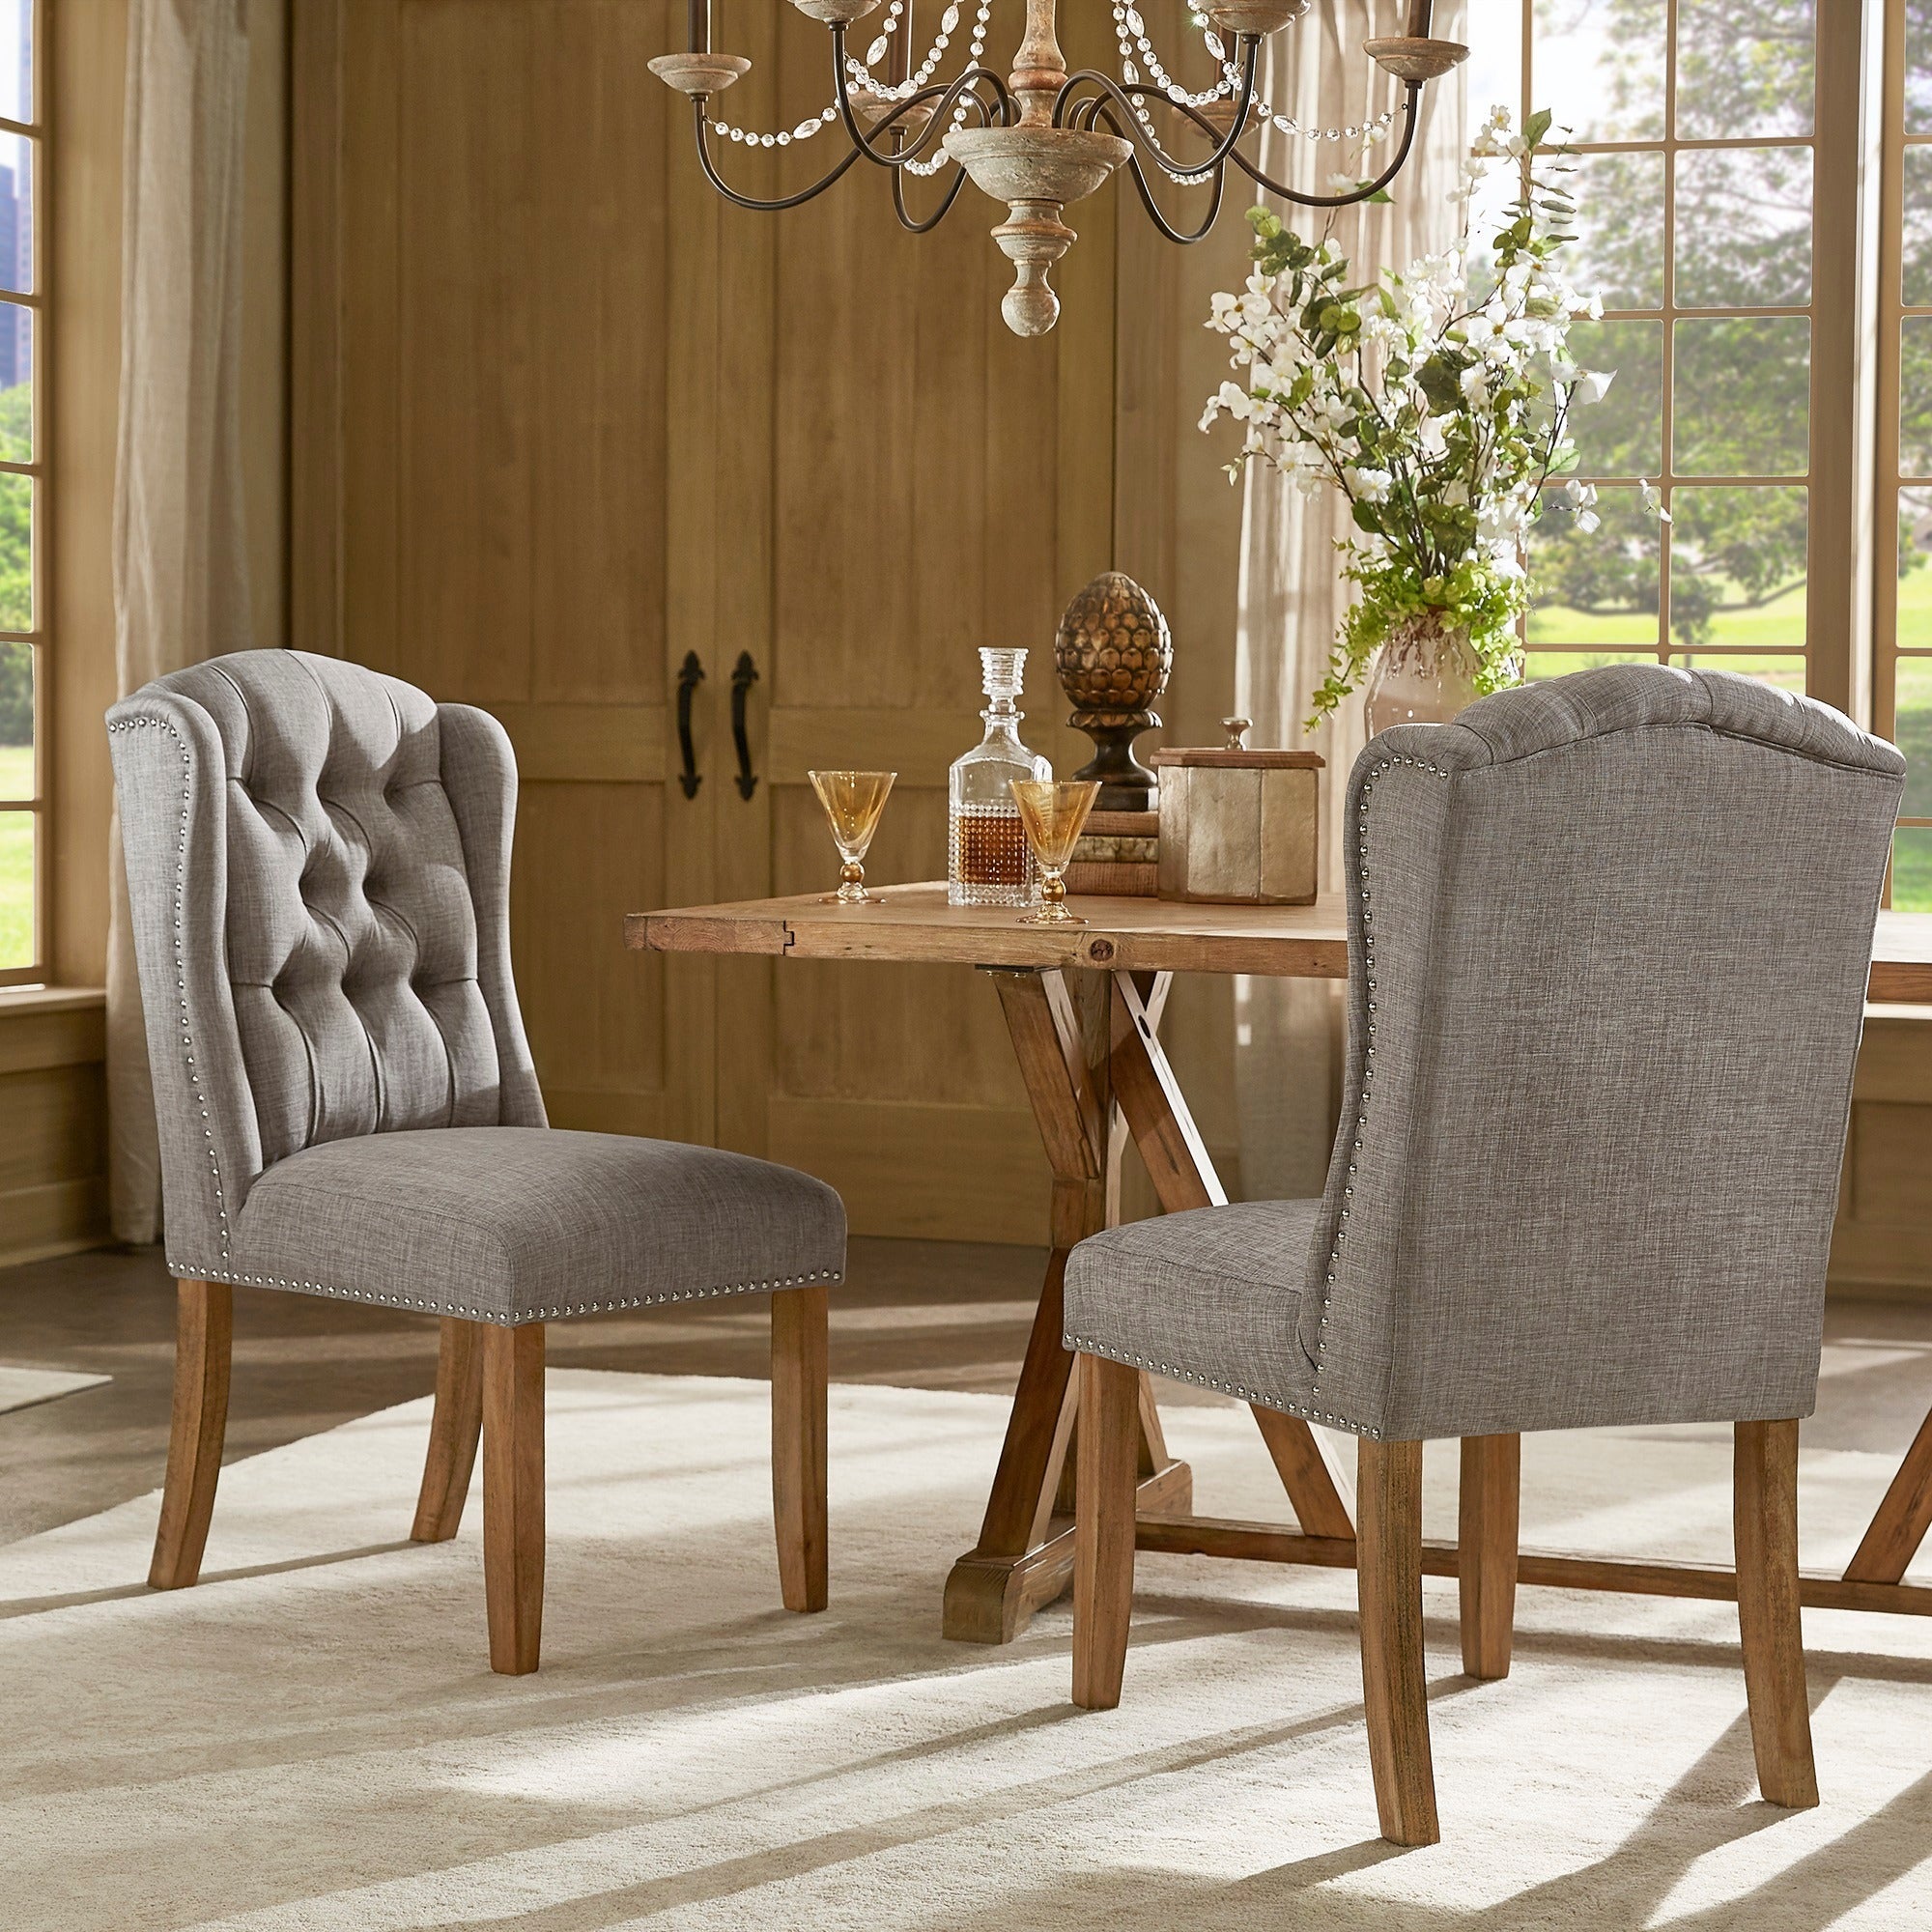 Tufted Wingback Dining Chairs with Nailhead Trim (Set of 2)